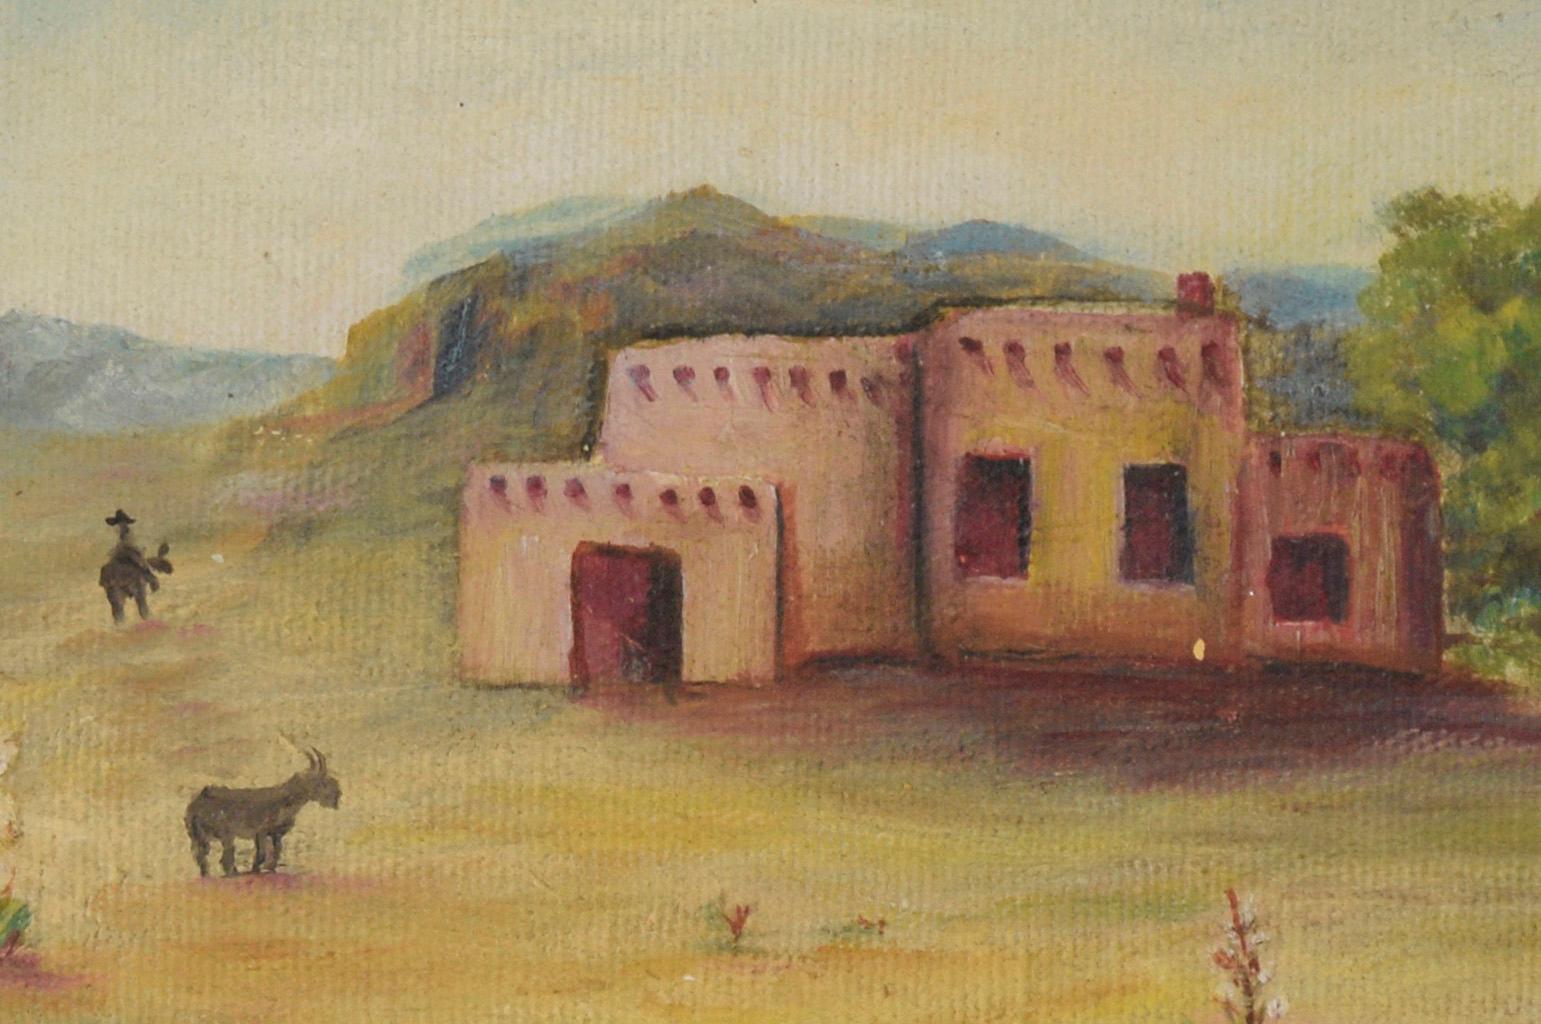 Red Adobe House in the Desert - Impressionist Painting by Elizabeth Ann Higgins